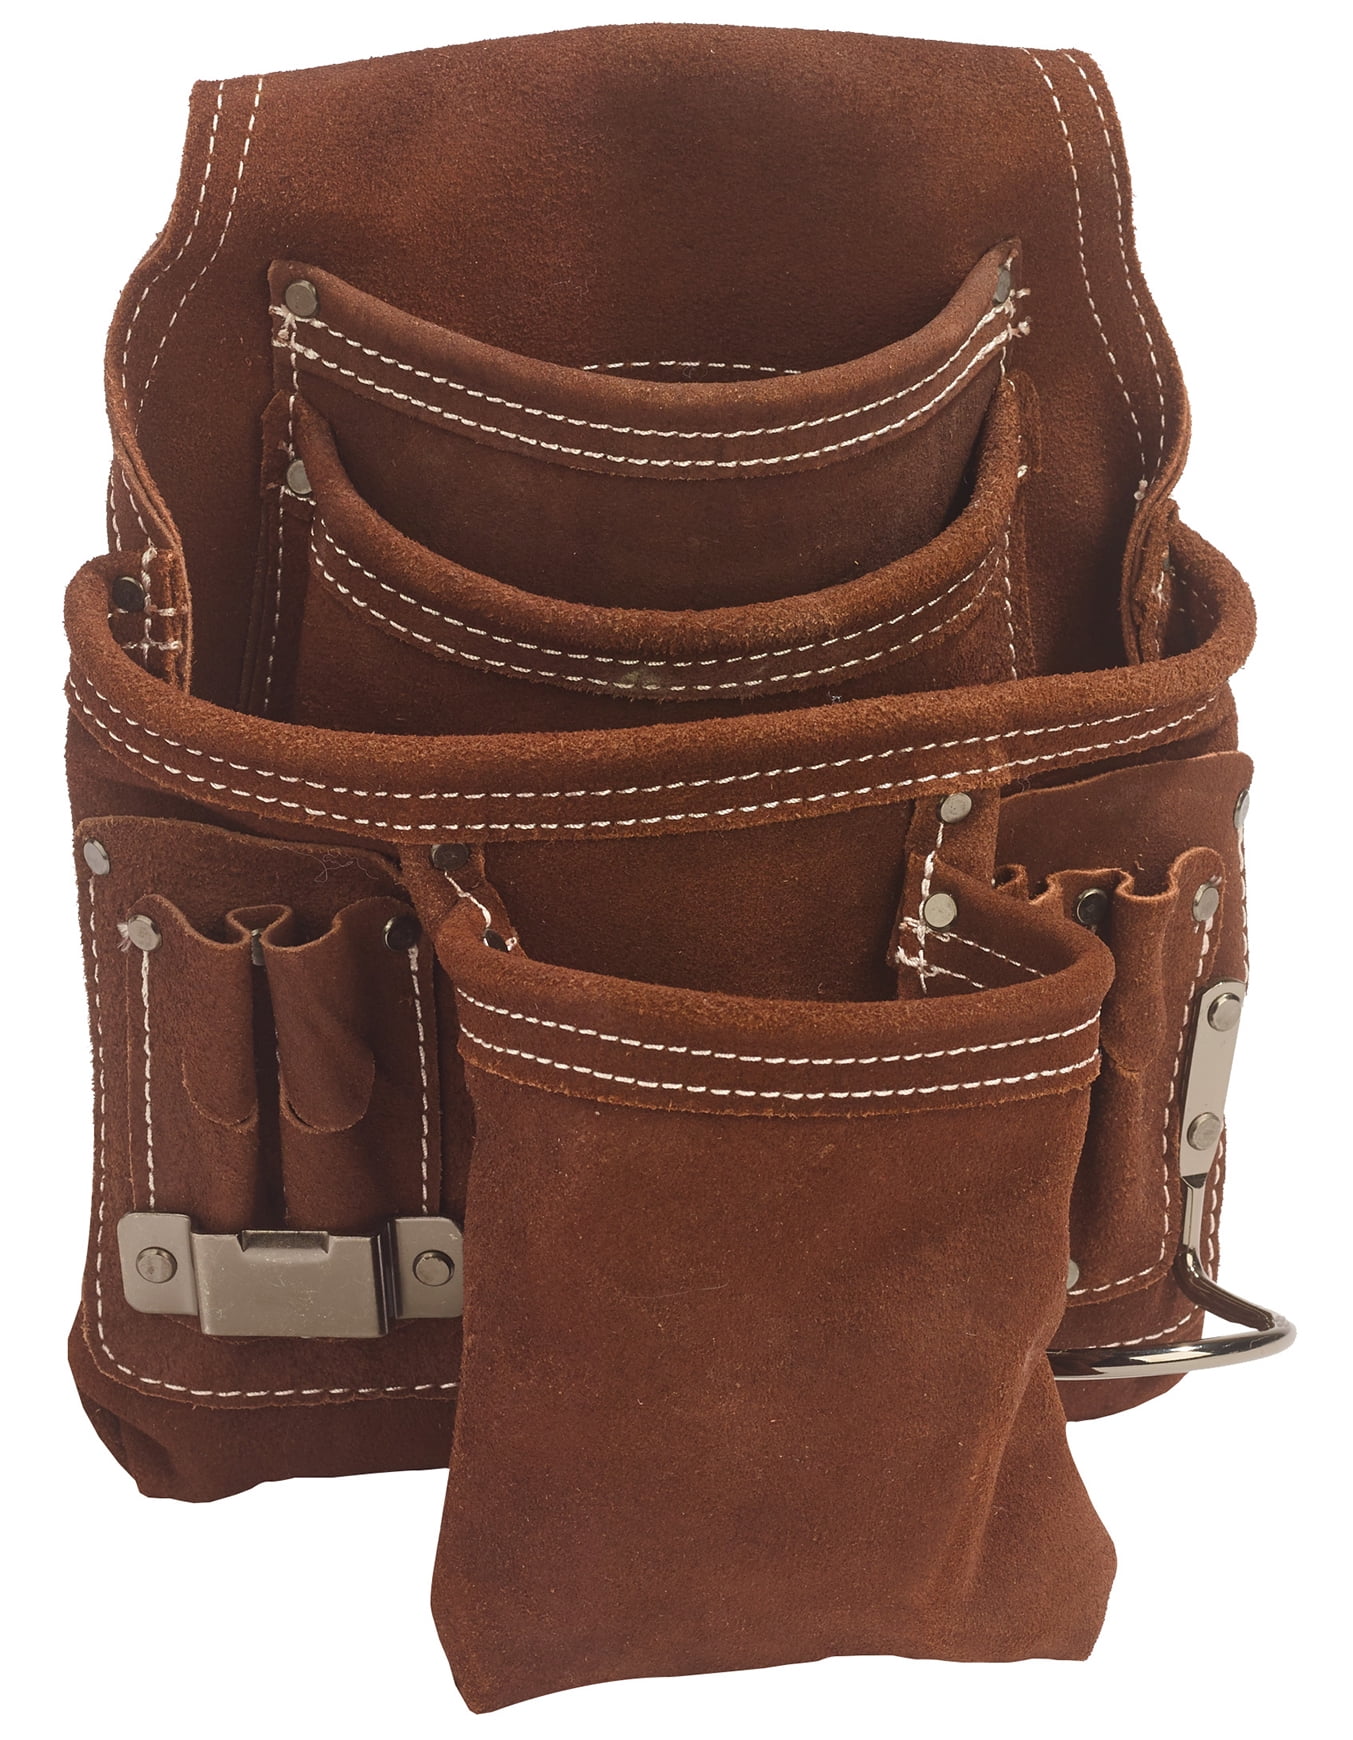 Bucket Boss 54063 10 Pocket Suede Leather Pouch